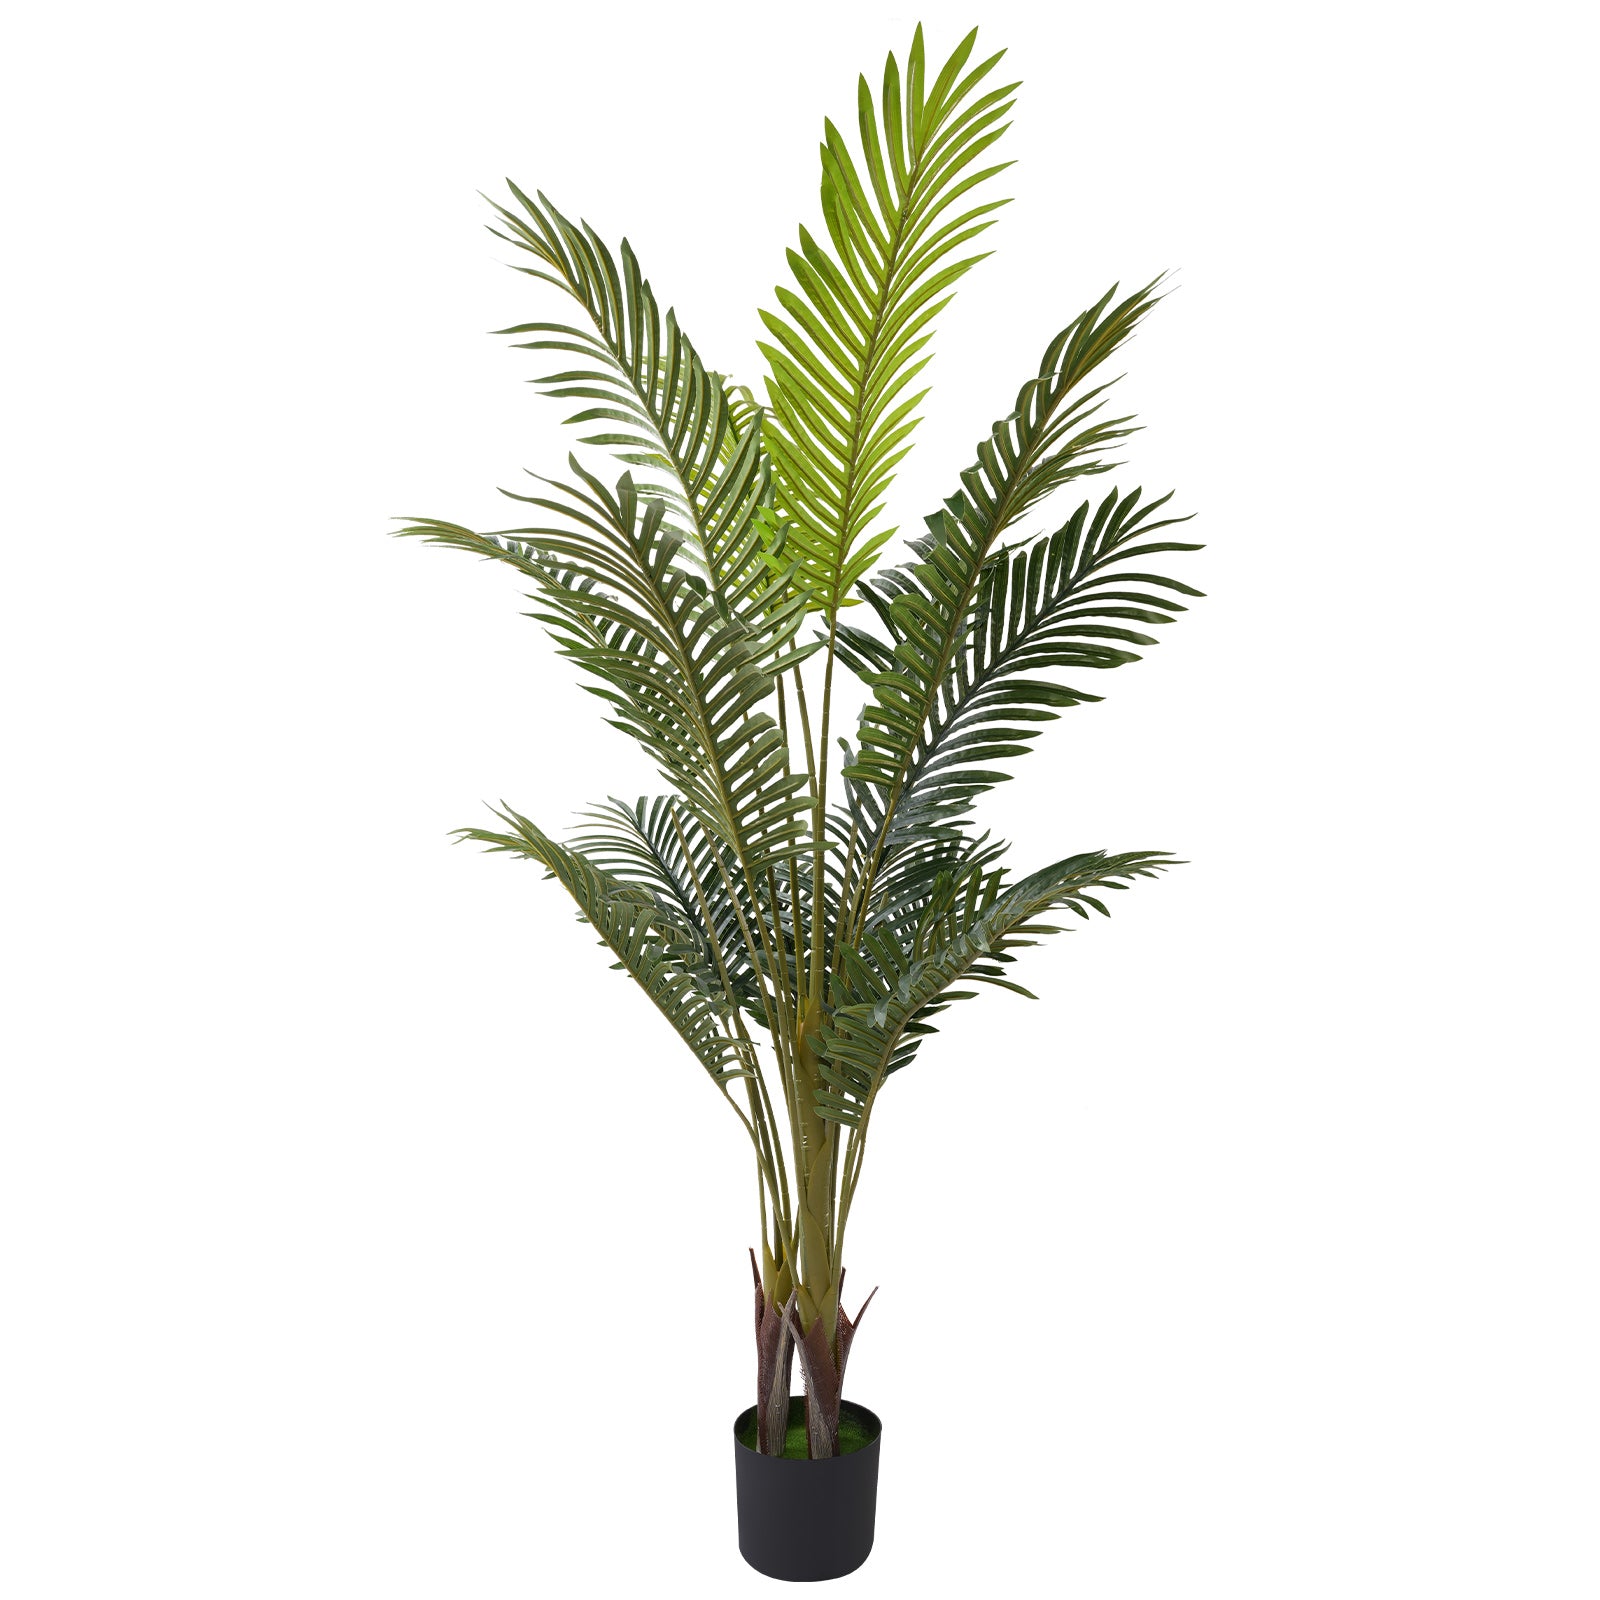 5.2ft Artificial Palm Tree Plant with 17 Decorative Leaves Faux Plant with Pot, Green